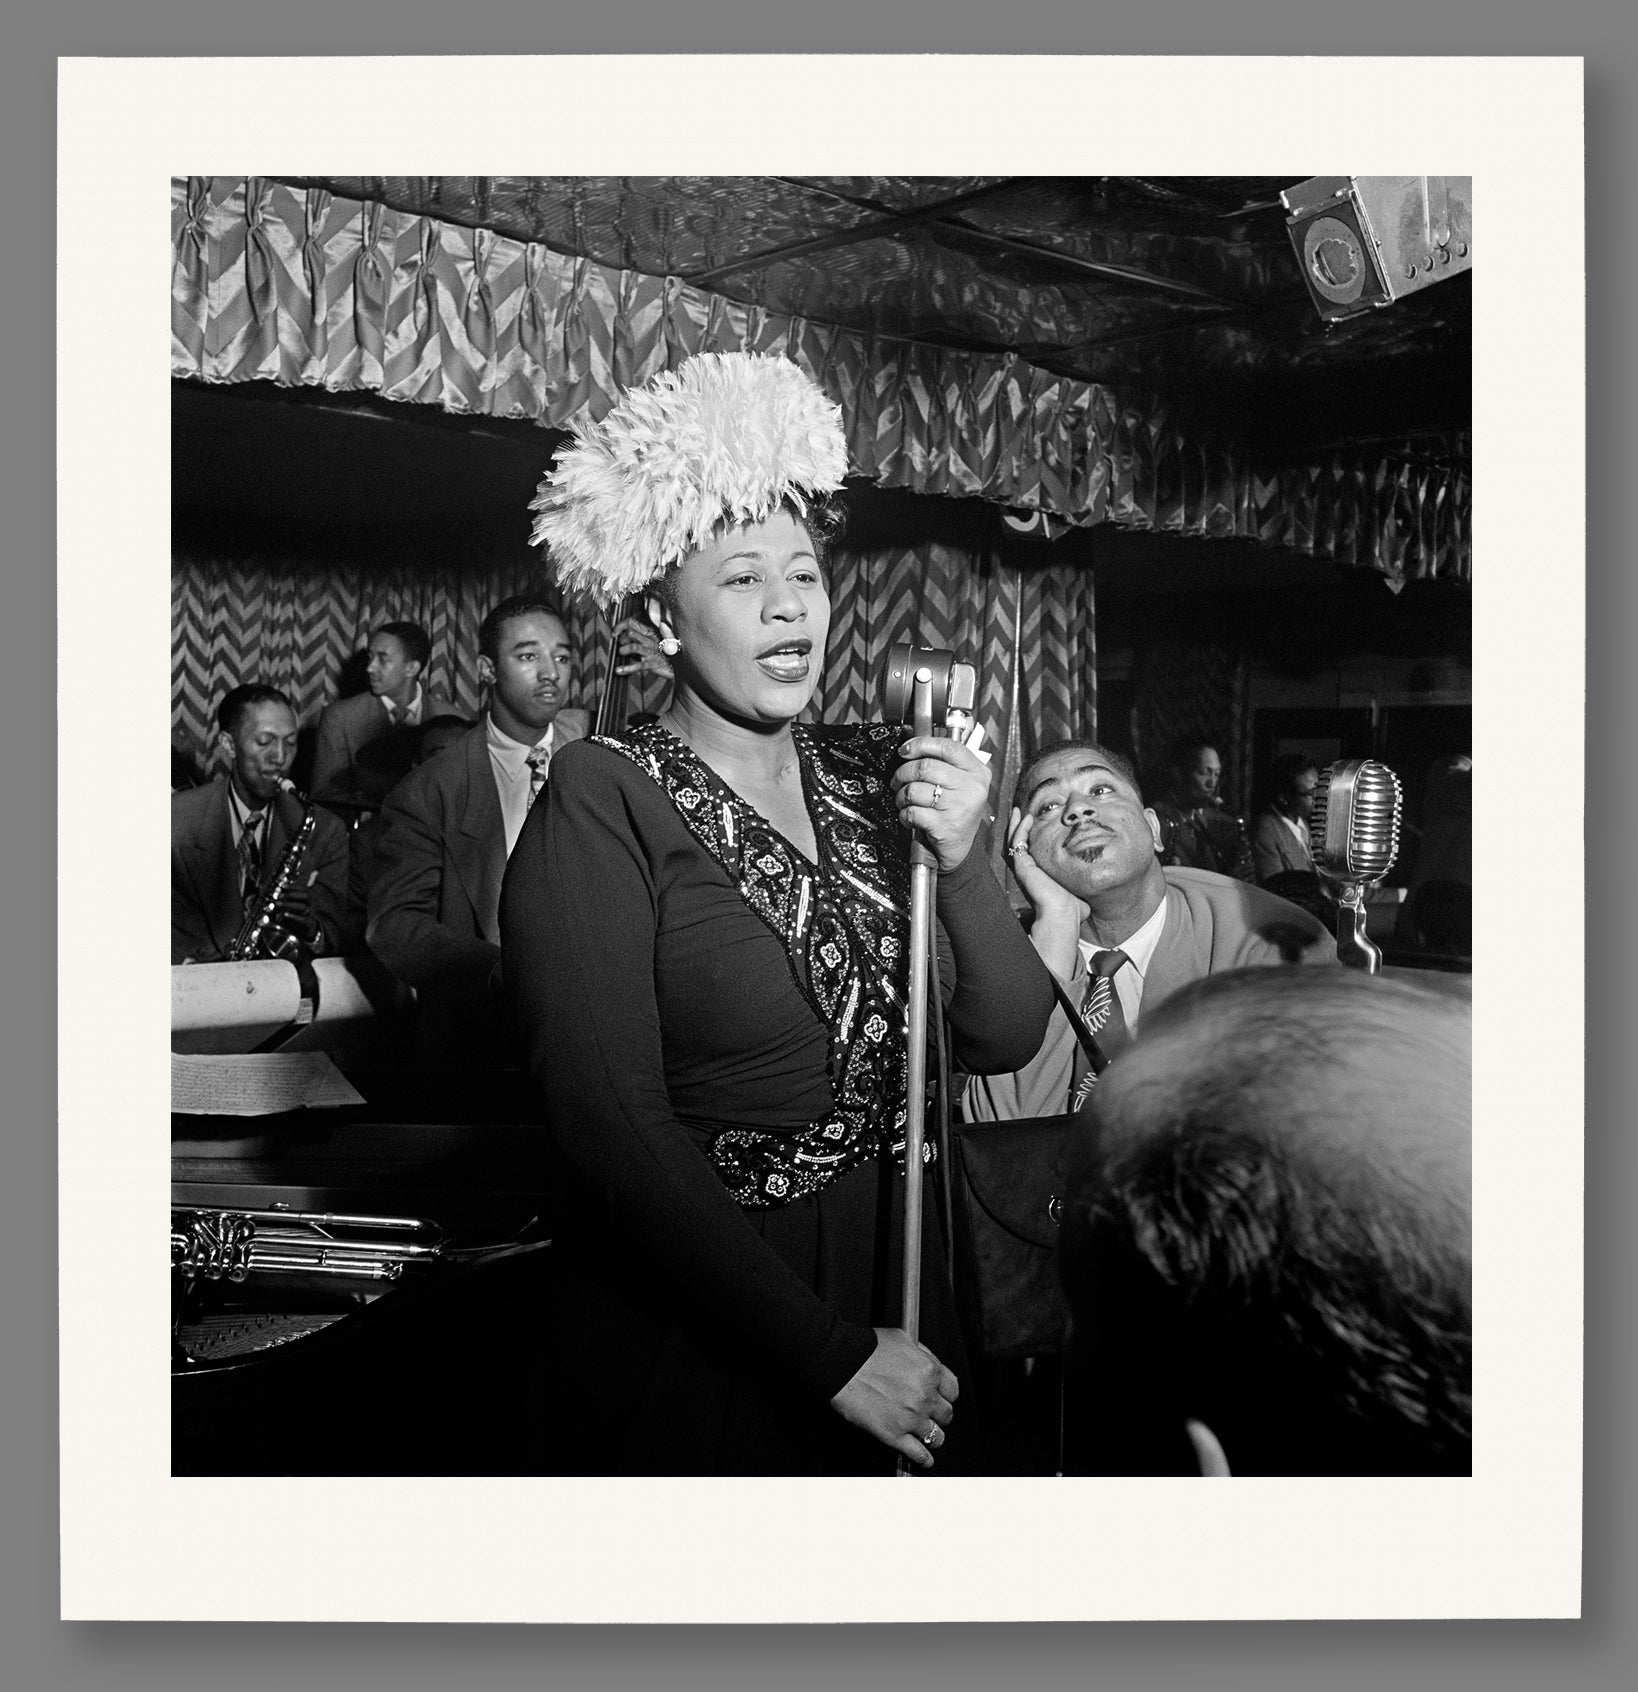 A mockup paper print of a black and white photograph of Ella Fitzgerald